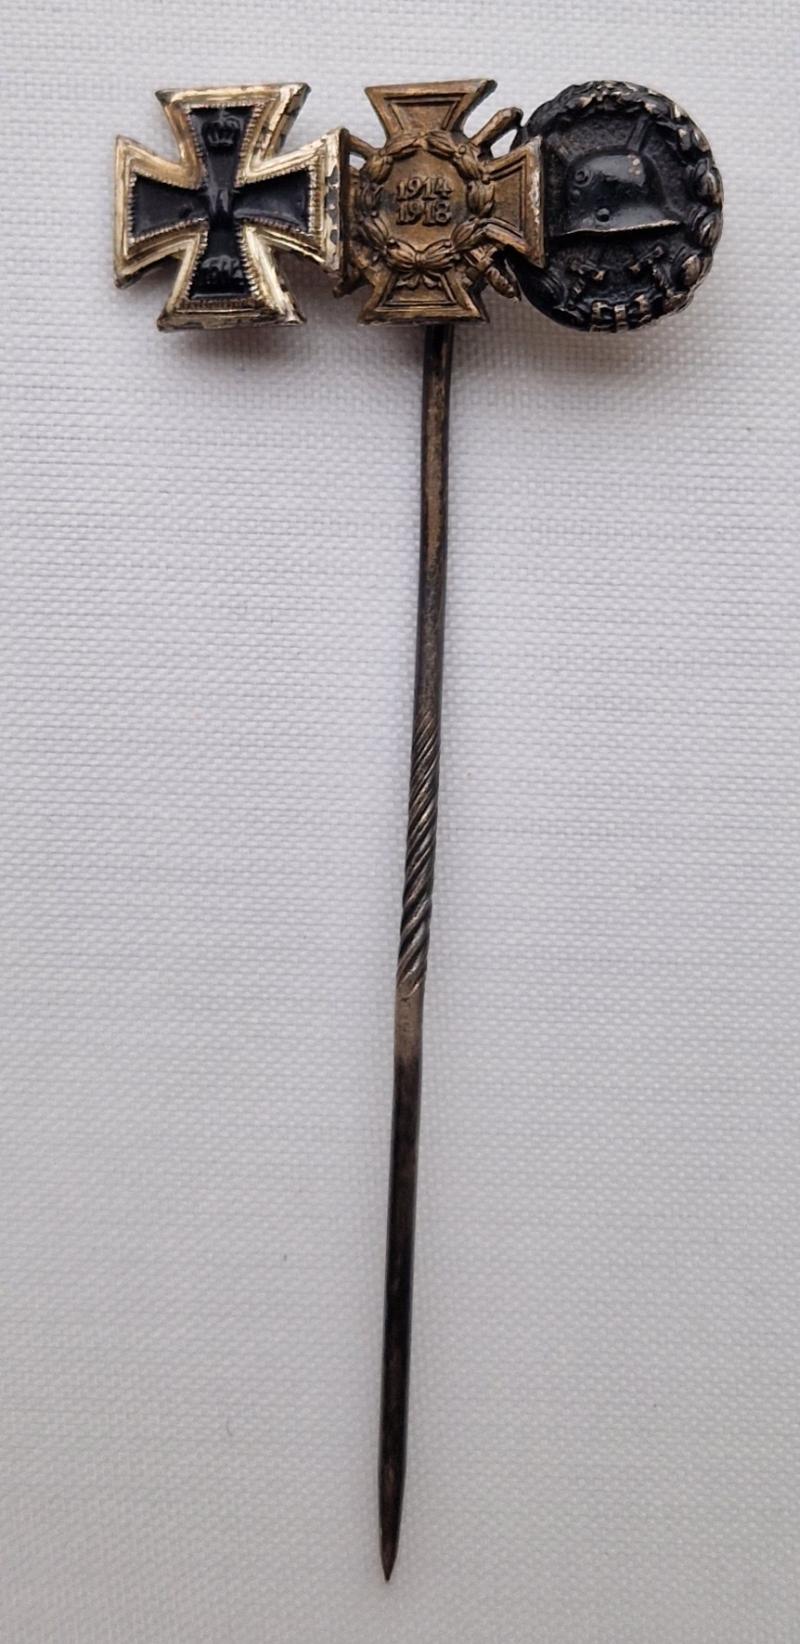 3 place 1914 Iron Cross/Hindenburg Cross and Black Wound Badge stickpin by BH Mayer mm L/18 Triple marked.